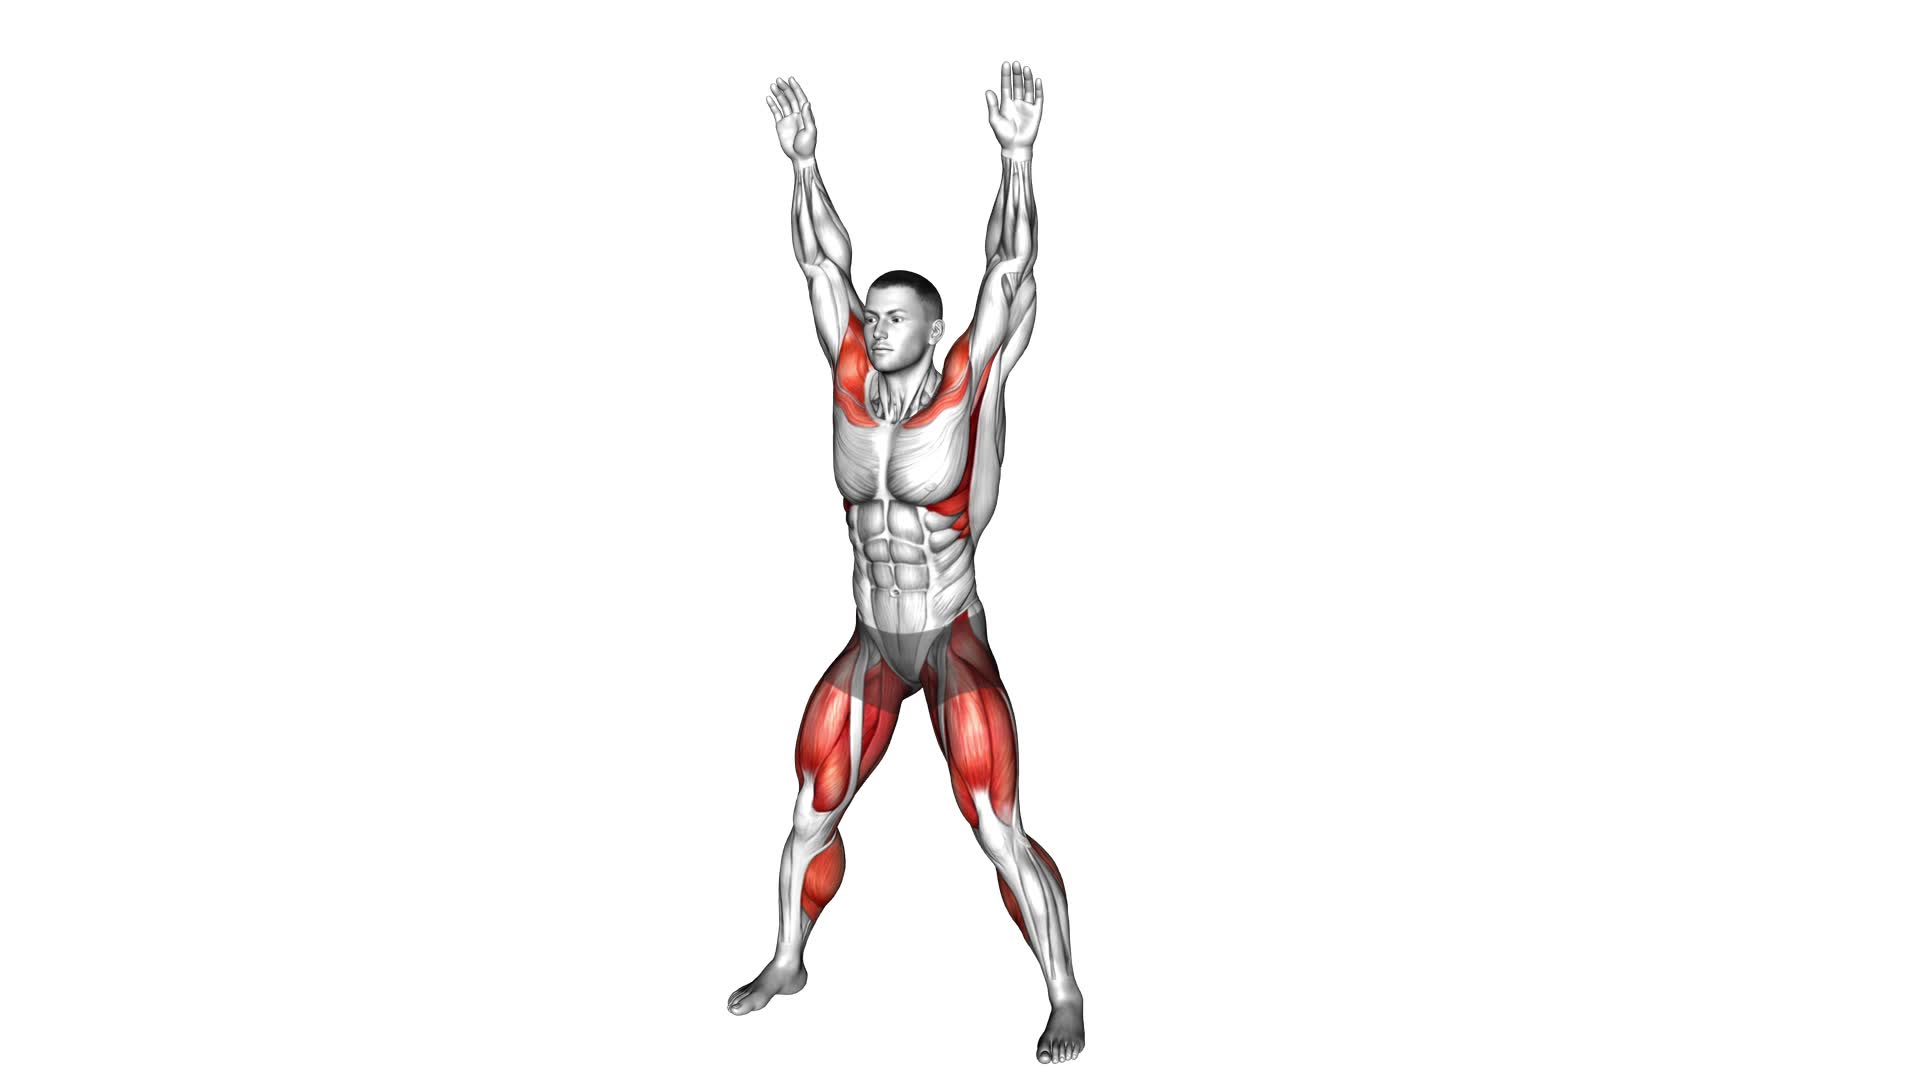 Jumping Squat Jack (male) - Video Exercise Guide & Tips